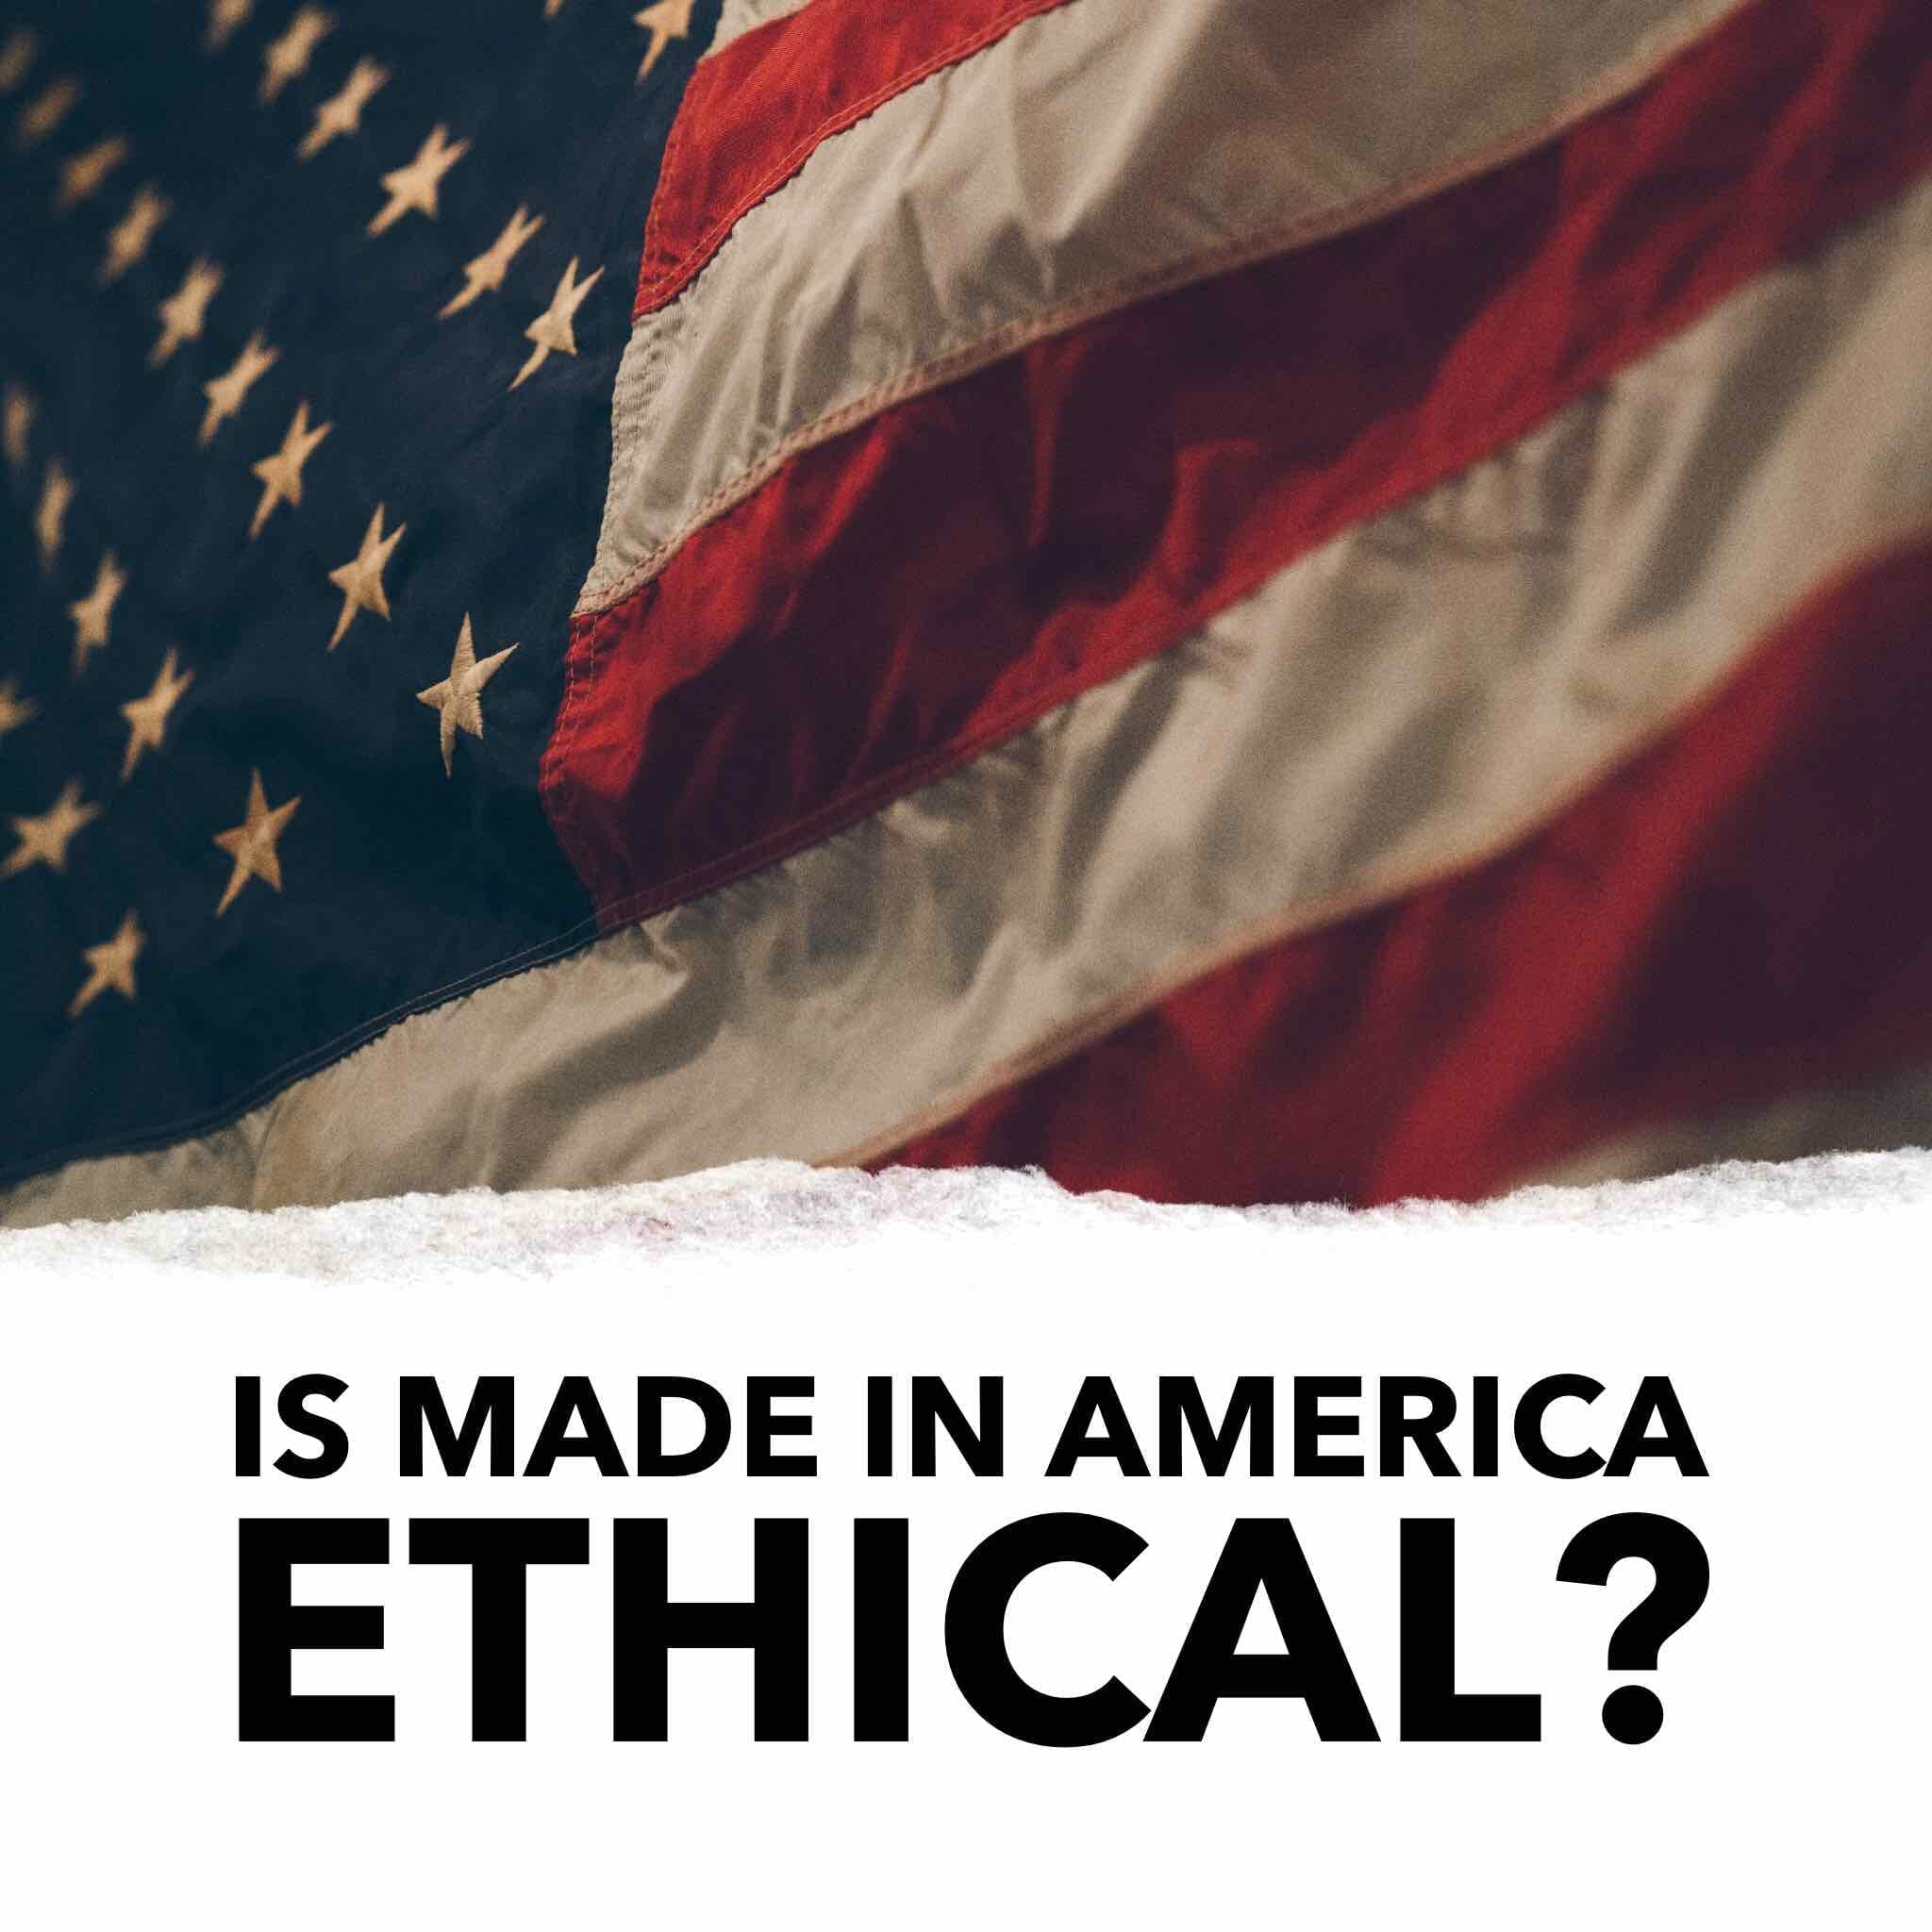 is made in america ethical?